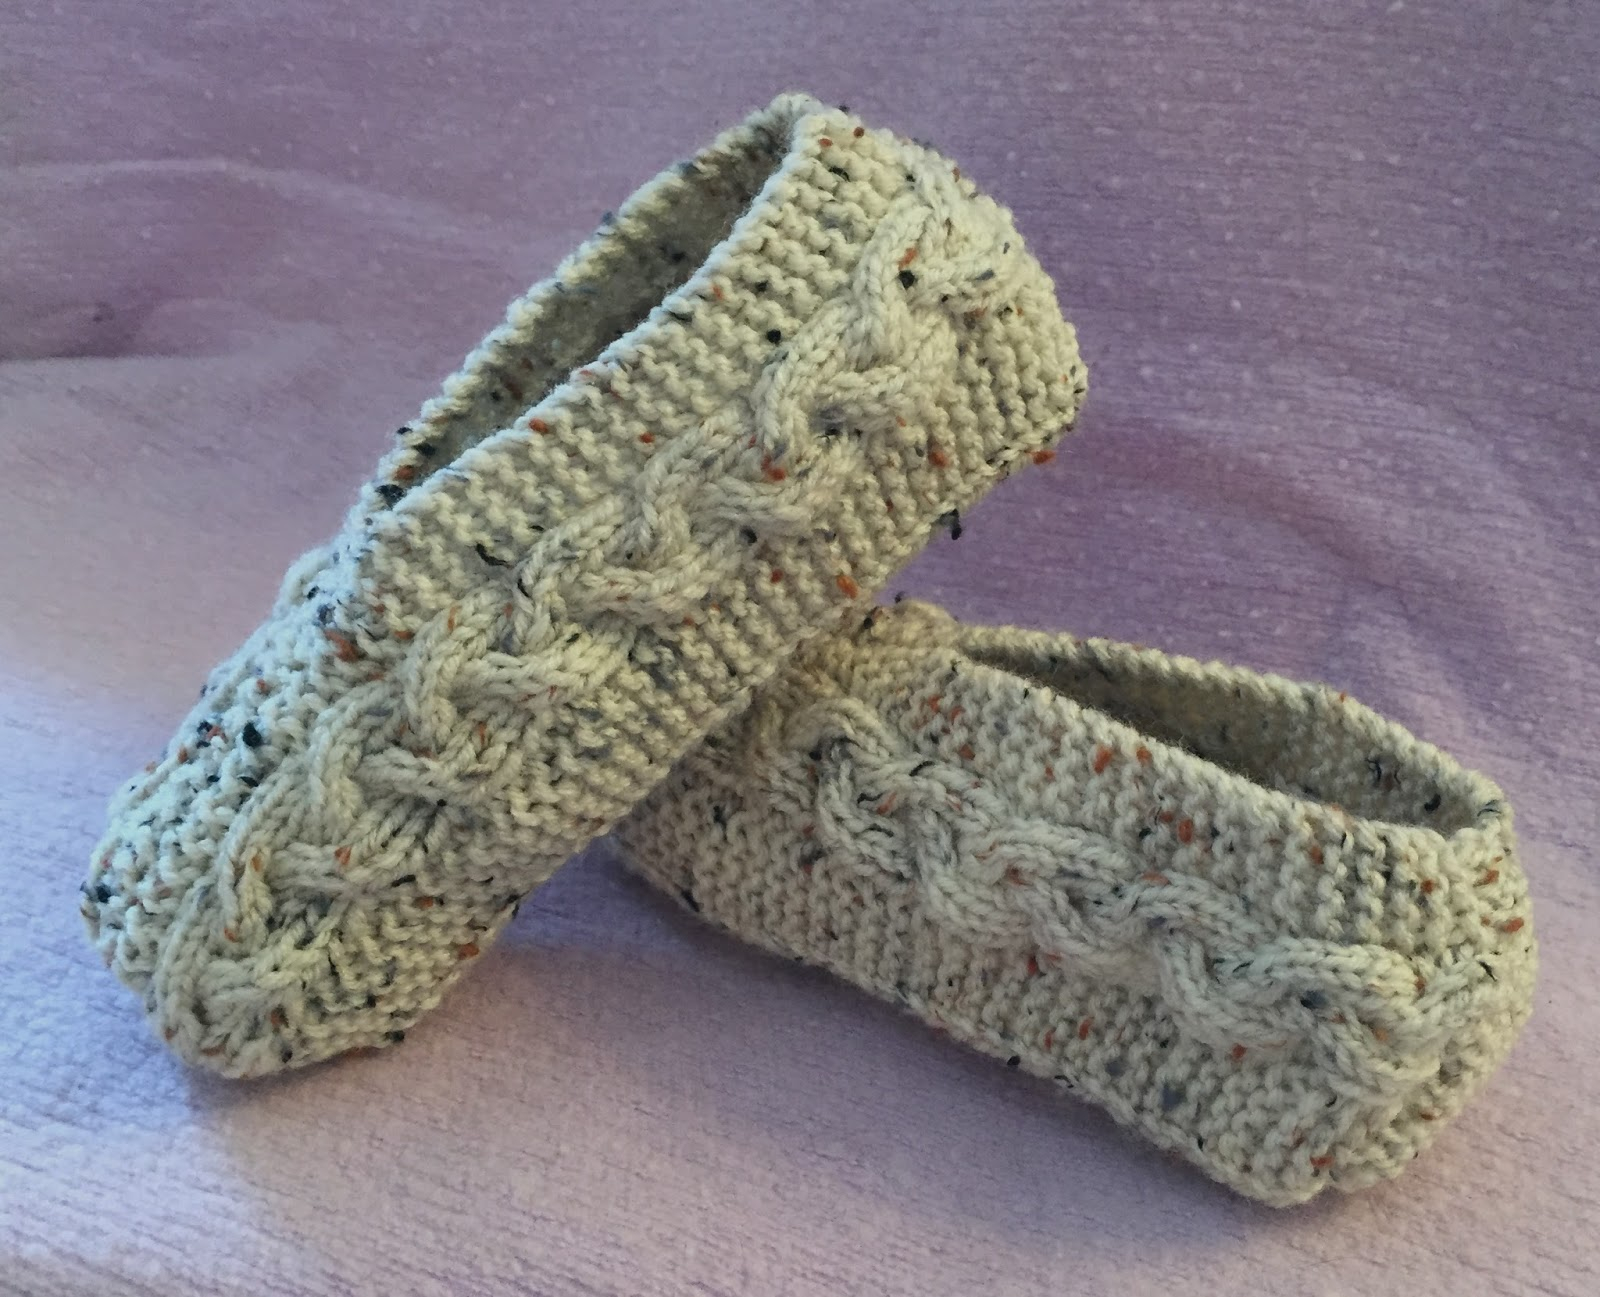 Knitted Slipper Patterns Kweenbee And Me Learn To Knit Slippers With These Patterns